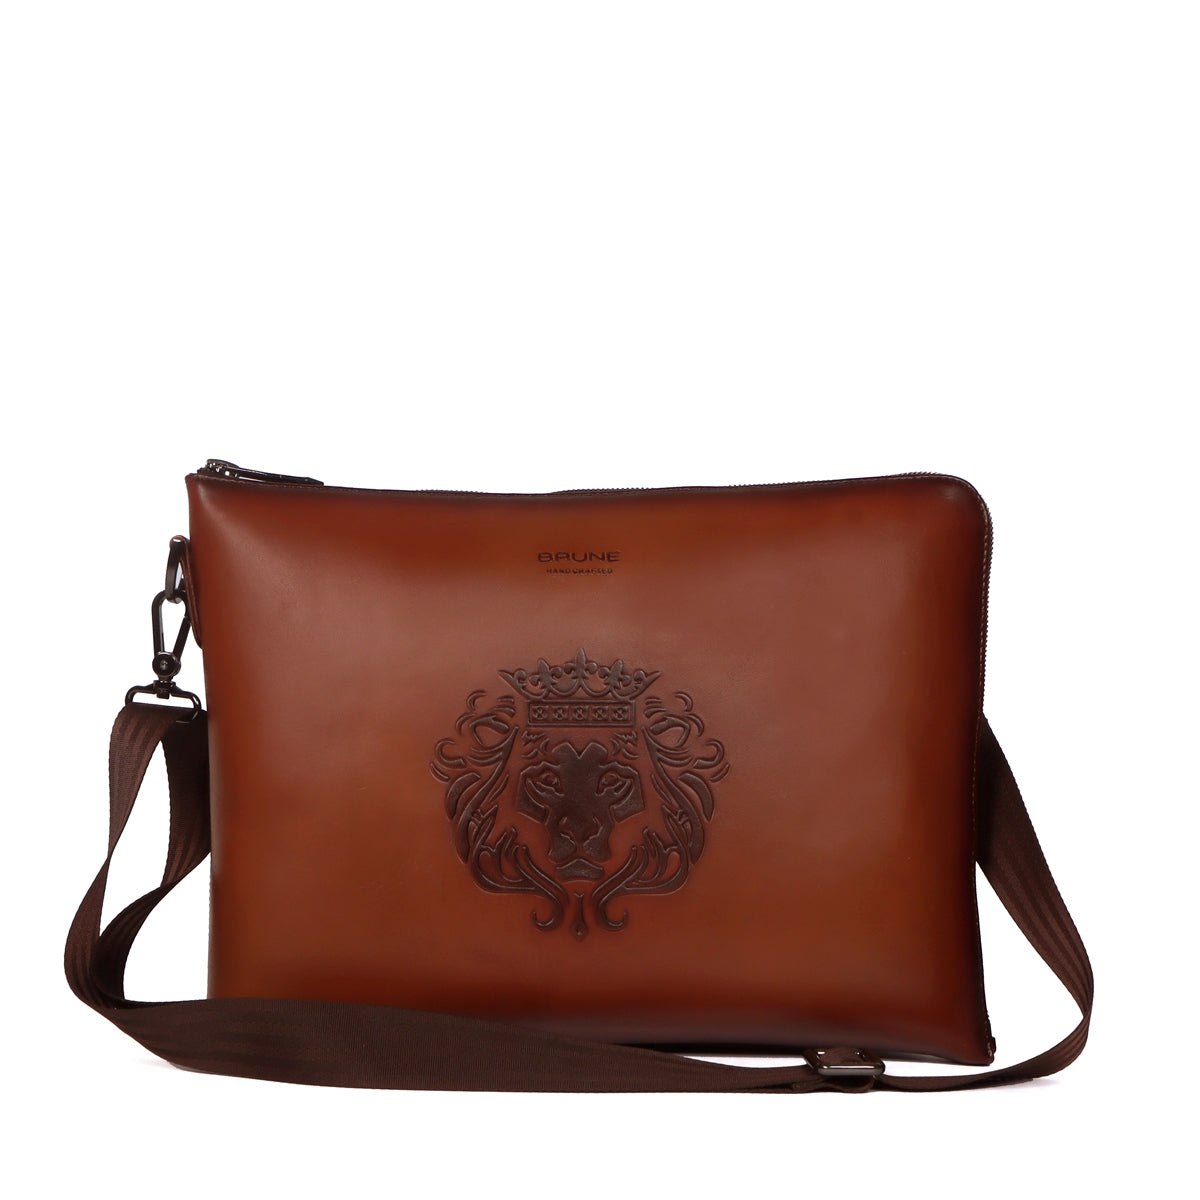 Stylish Laptop Sleeves Embossed Lion Tan Messenger Bag with Zip Compartment By Brune & Bareskin